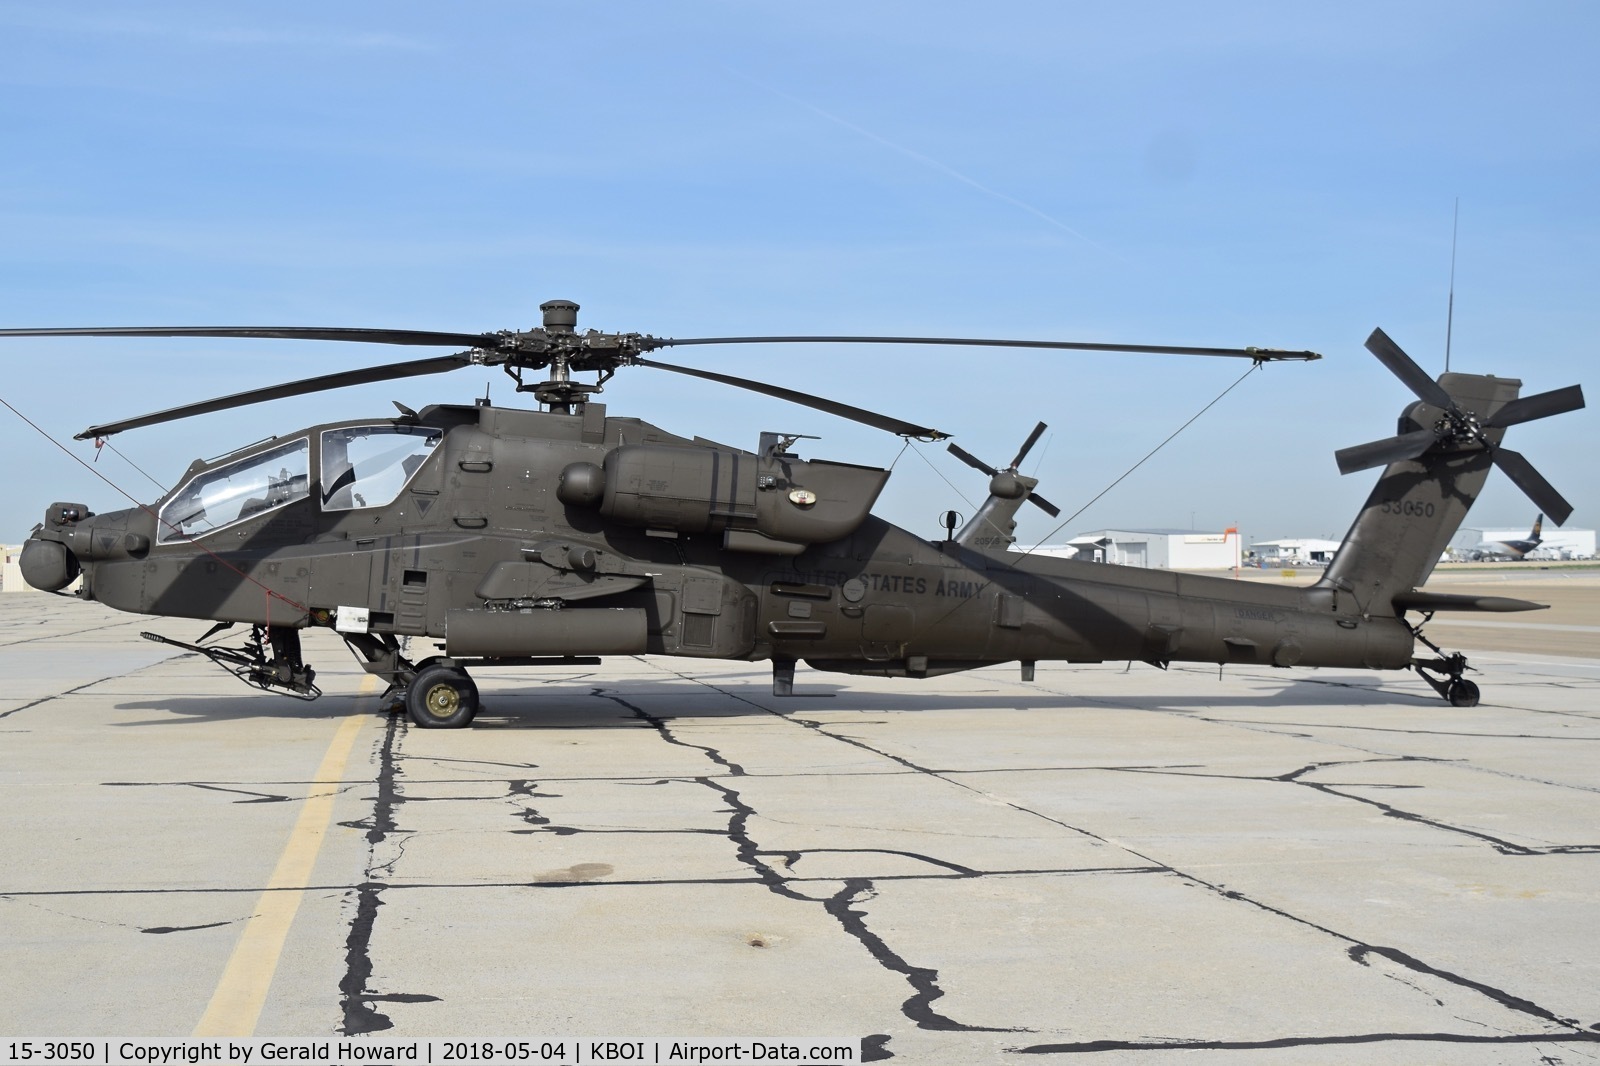 15-3050, 2015 Boeing AH-64E Apache Guardian C/N NM050, Parked on south GA ramp. Stationed at Gray Army Airfield, WA.